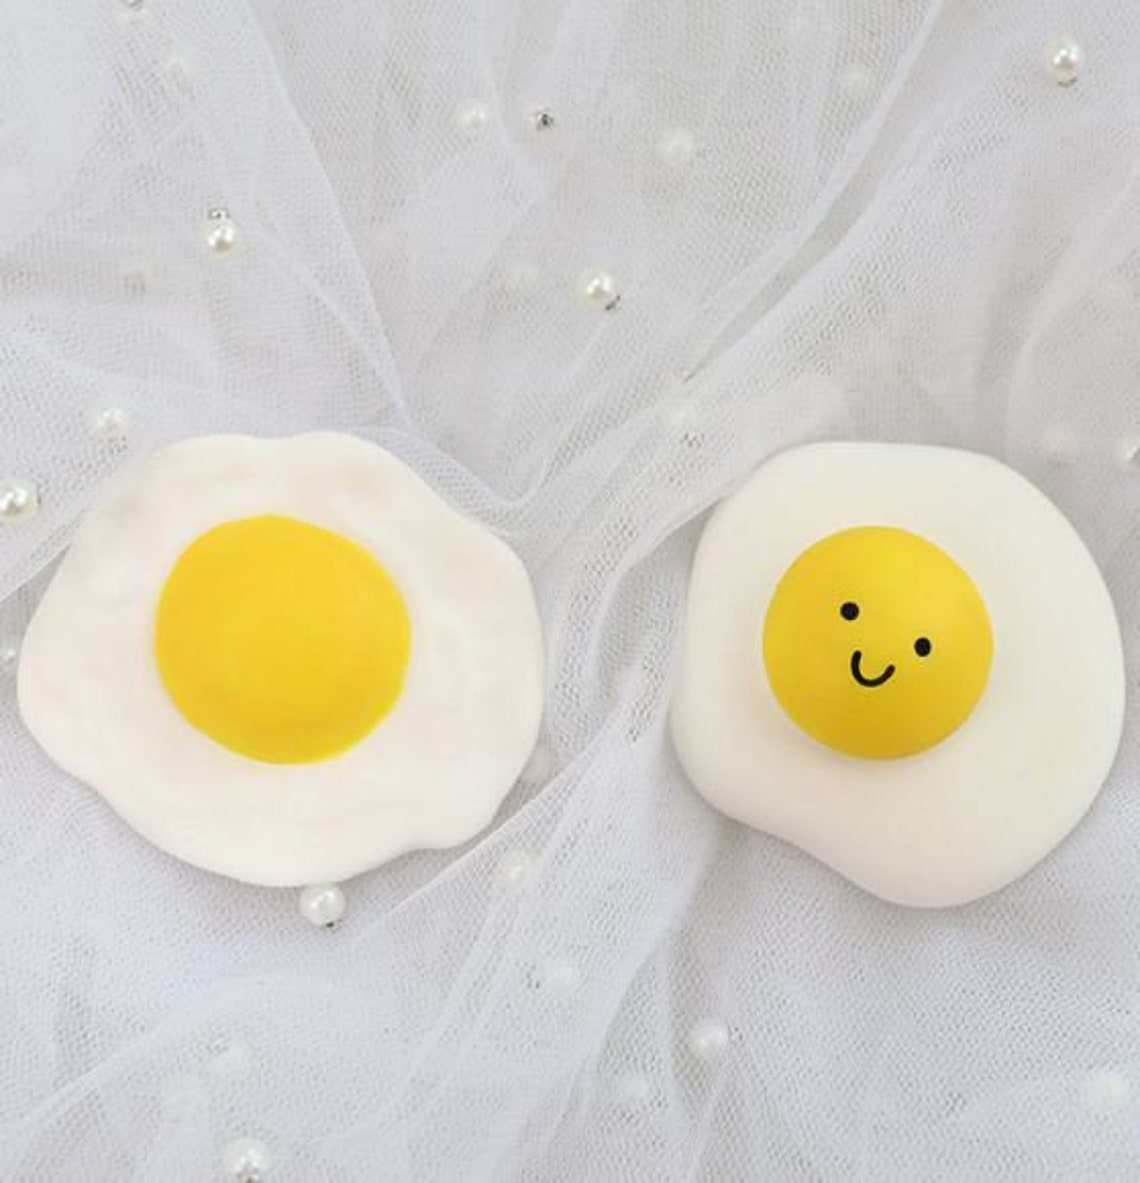 Poached eggs Candle silicone mold resin molds fondant mold | Etsy